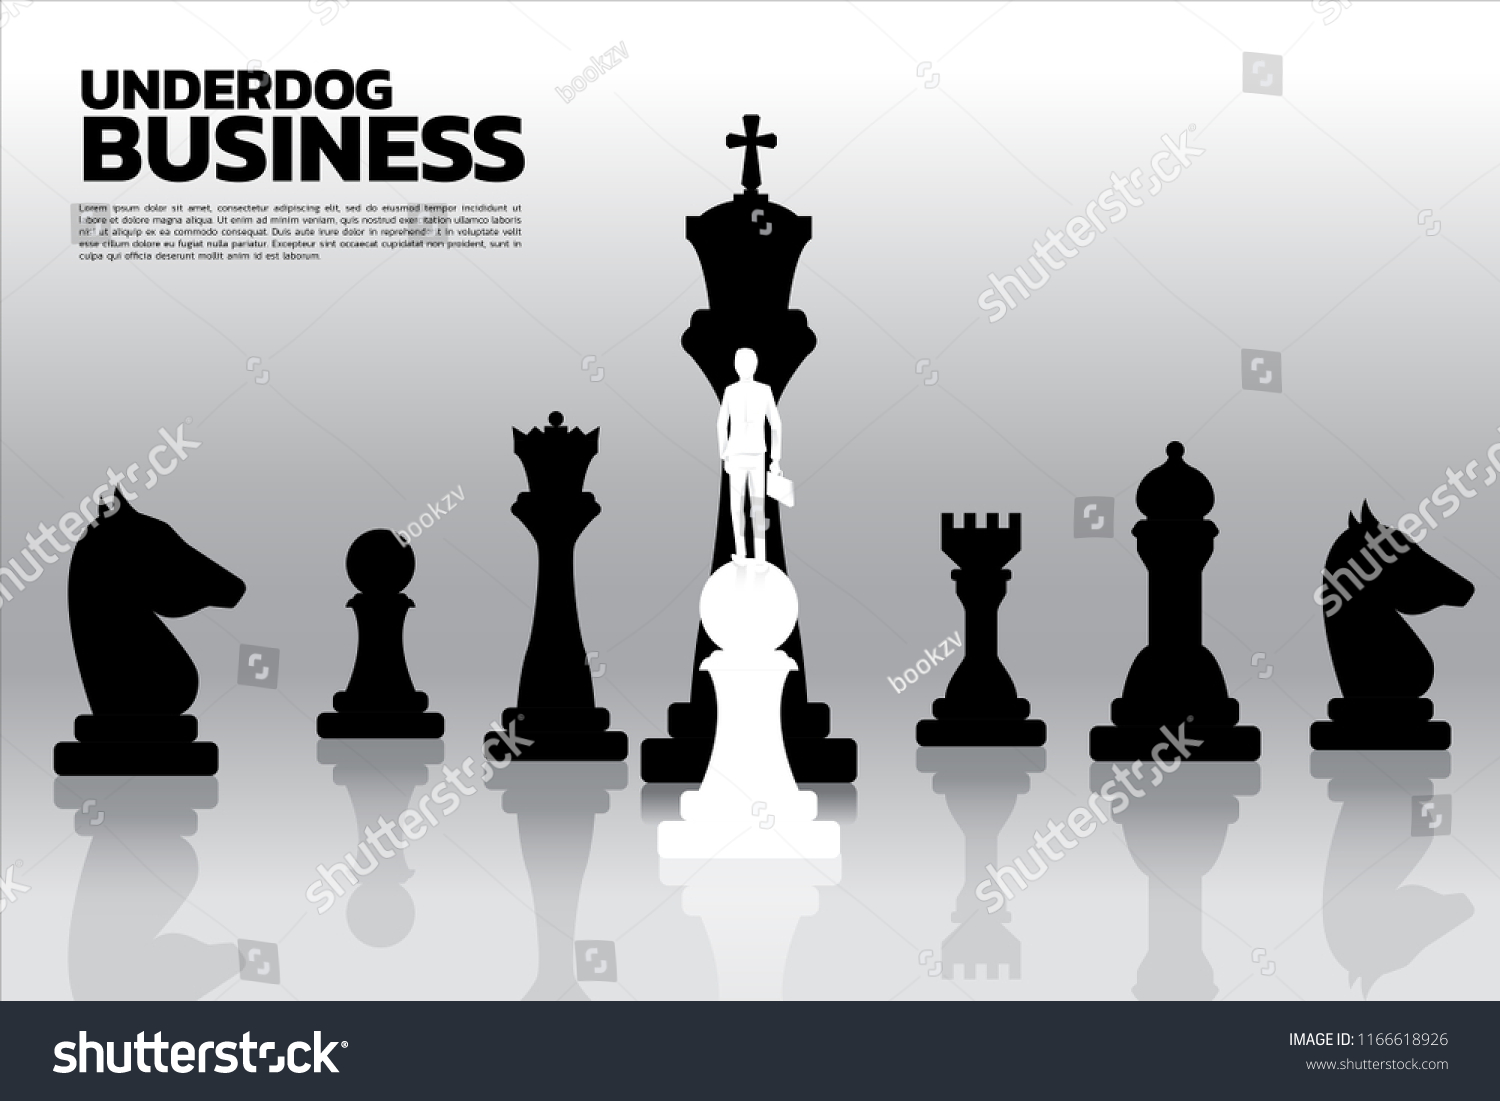 SVG of Silhouette of businessman standing on white pawn chess piece in front of all of black chess piece . Concept of underdog business marketing strategy. svg